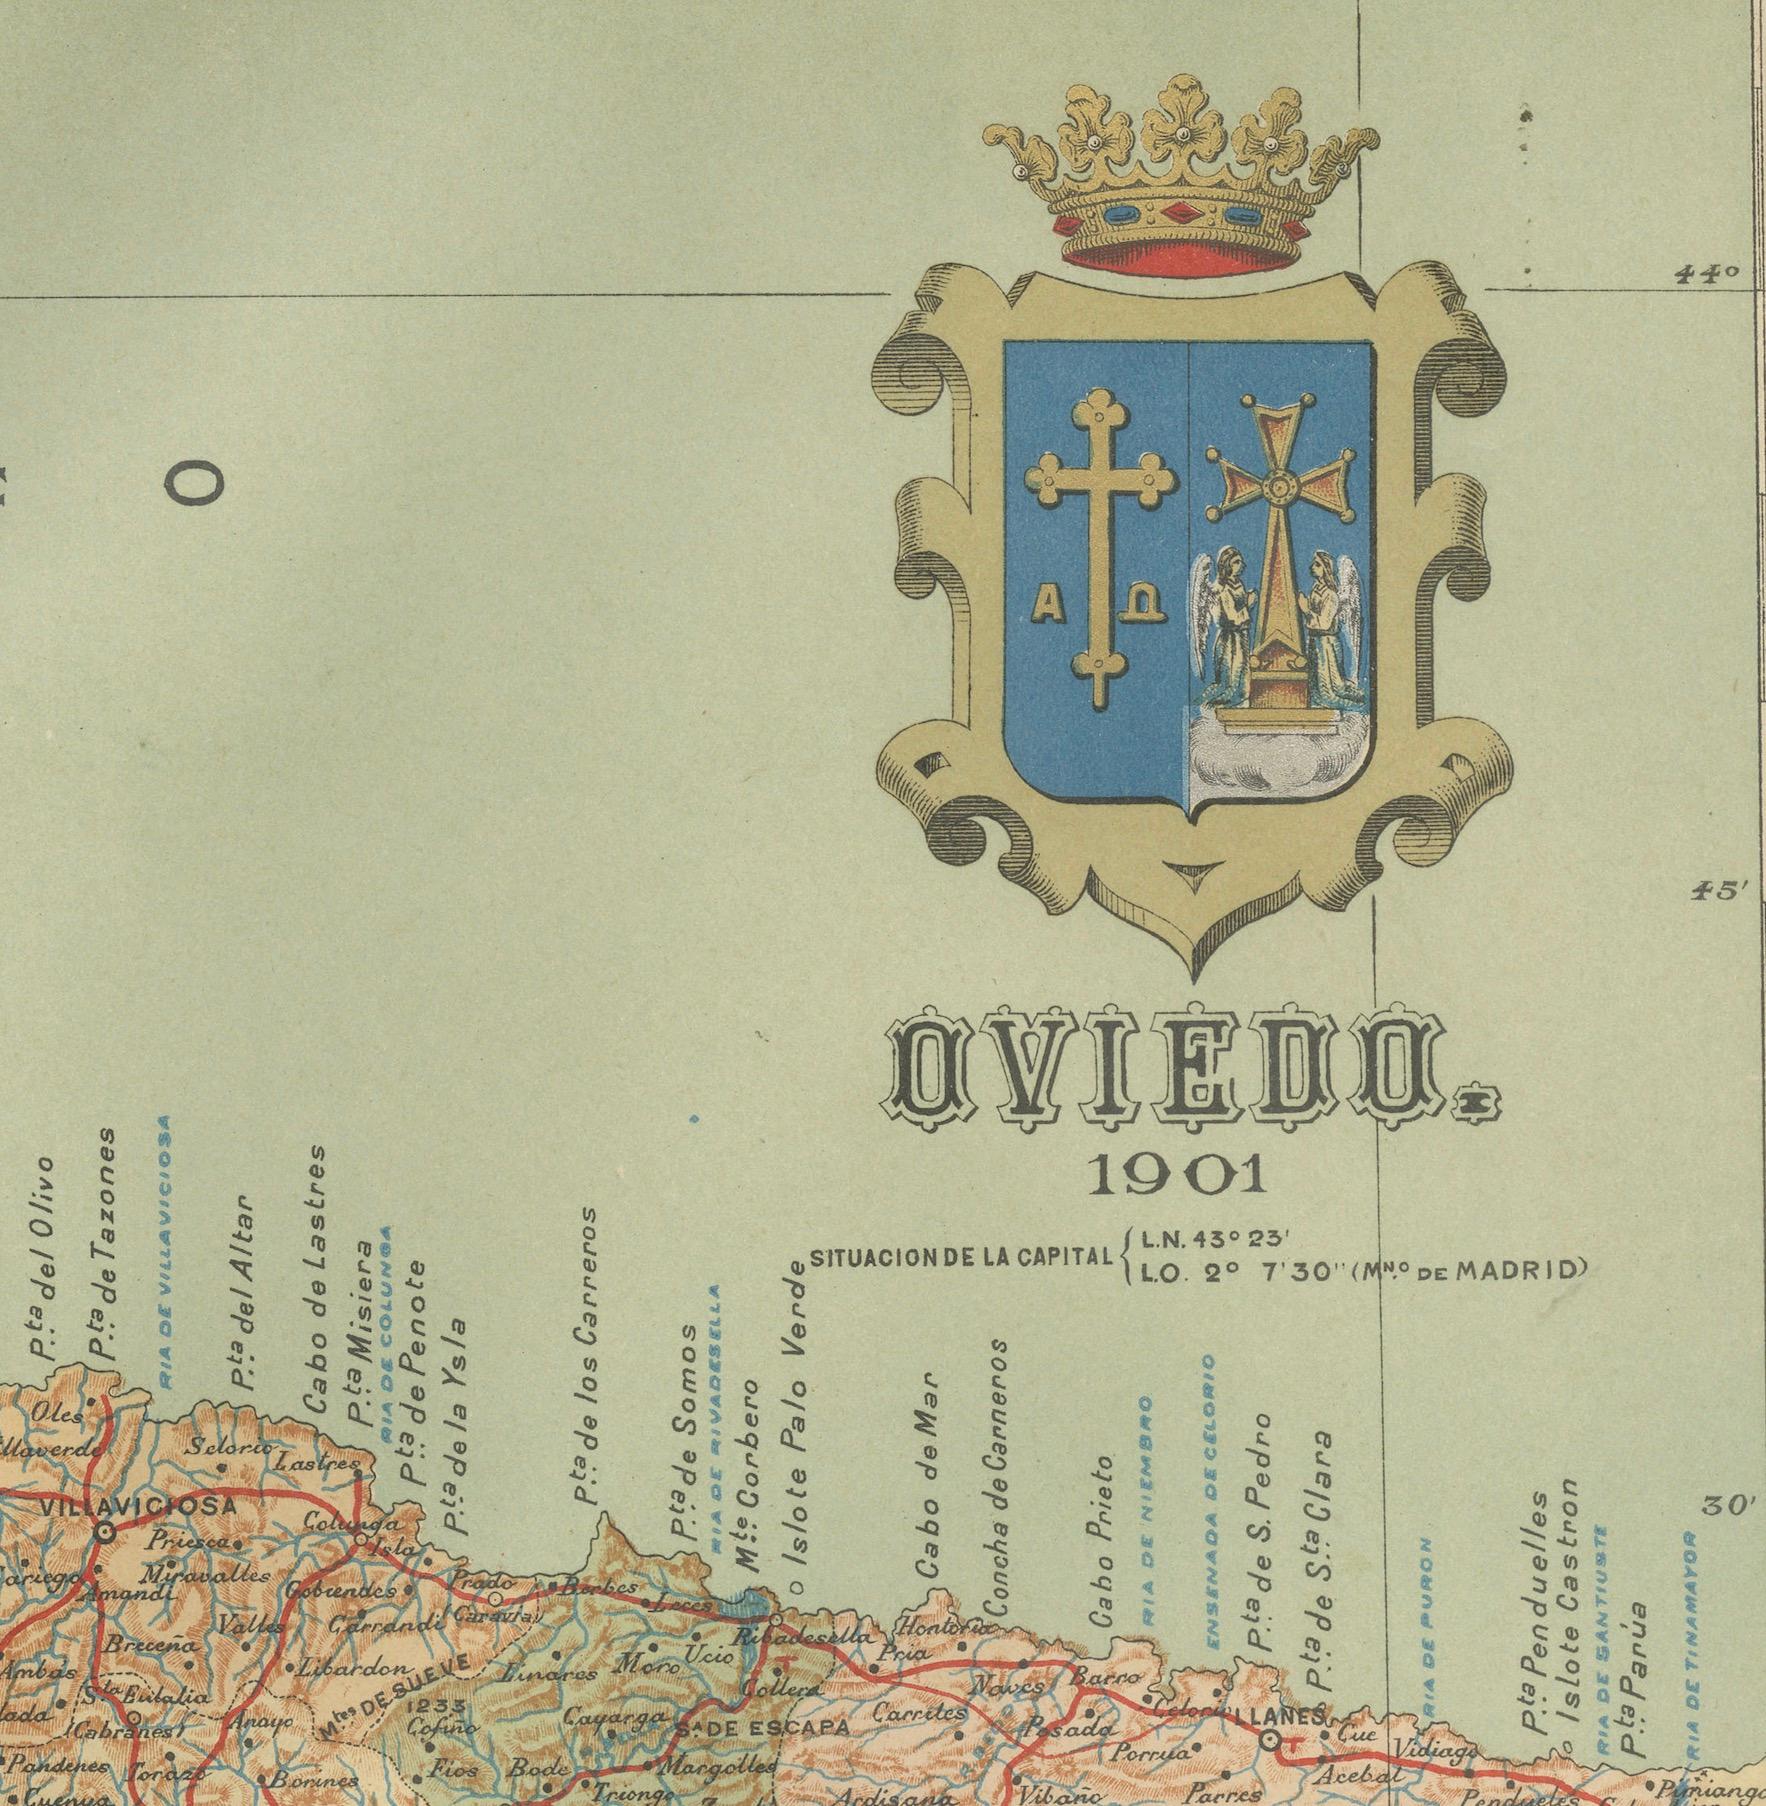 Paper The Lay of the Land: A 1901 Topographic Map of Oviedo, Asturias For Sale